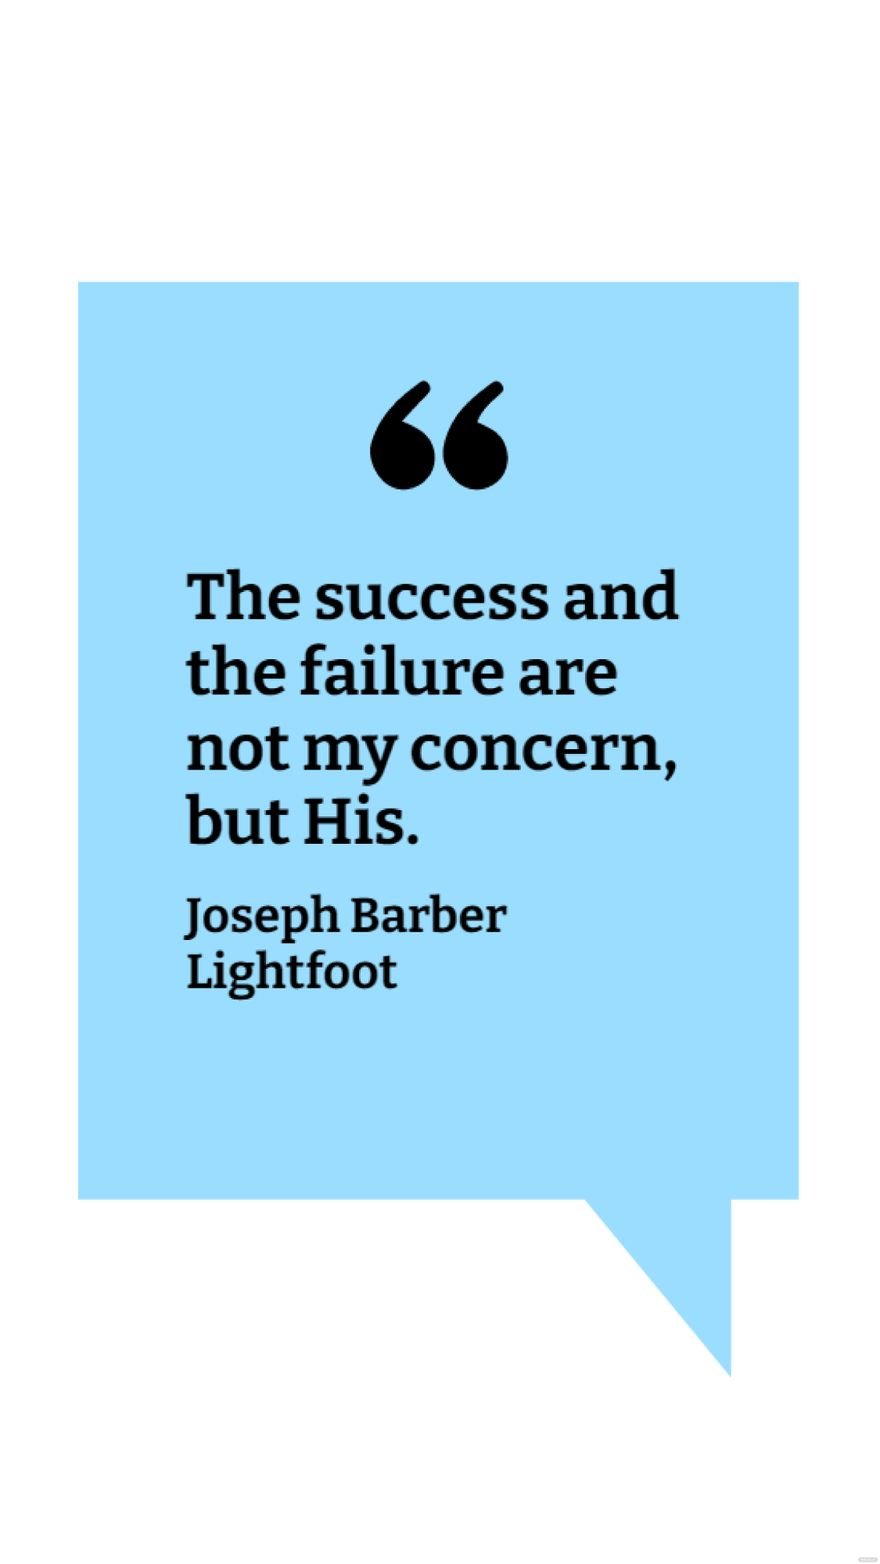 Free Joseph Barber Lightfoot - The success and the failure are not my concern, but His.